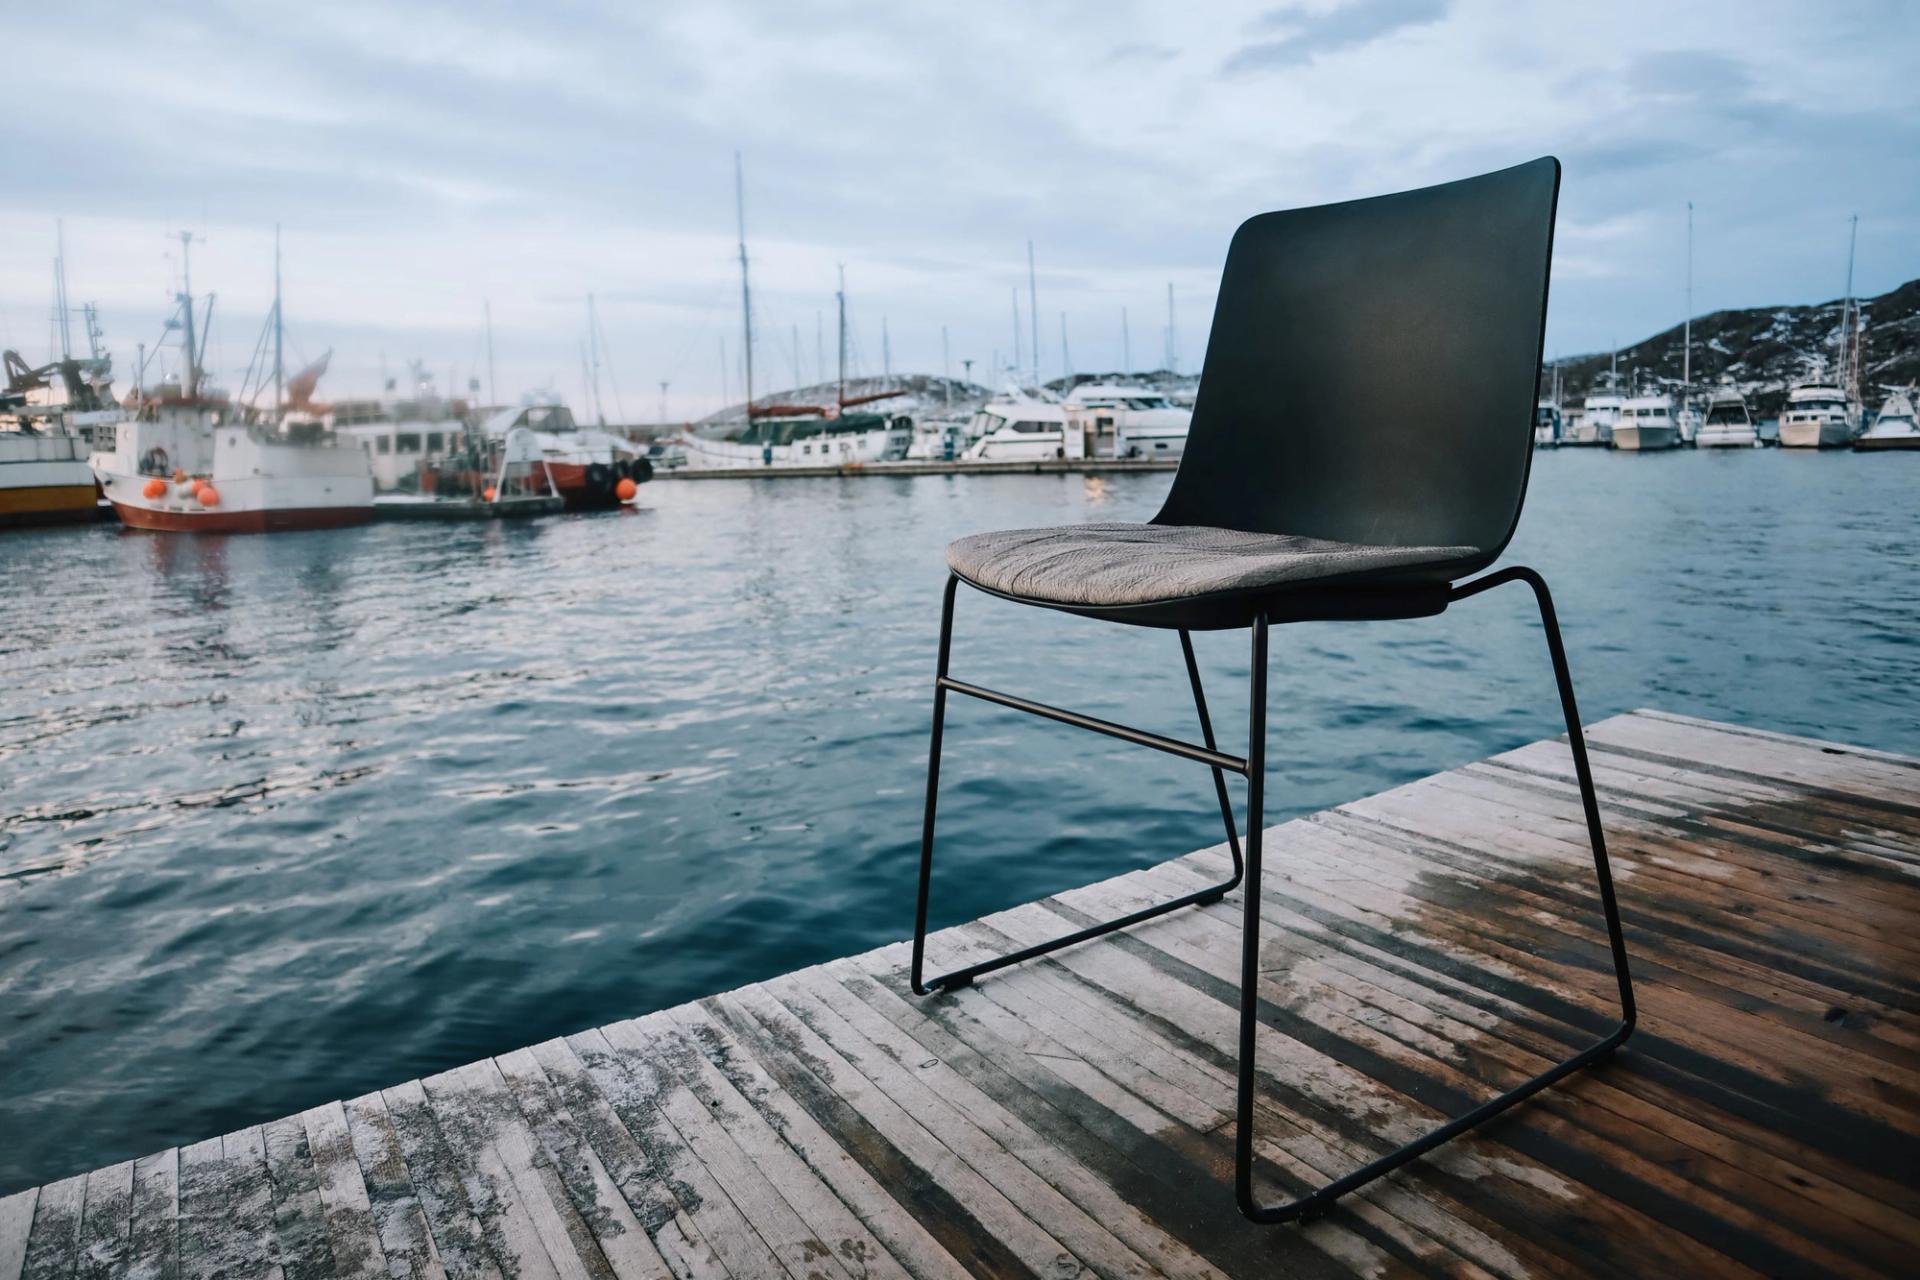 Chair made of plastic waste - Nordic Comfort ProductsBusiness-Norway_Design_Lifestyle_Sustainable_functional